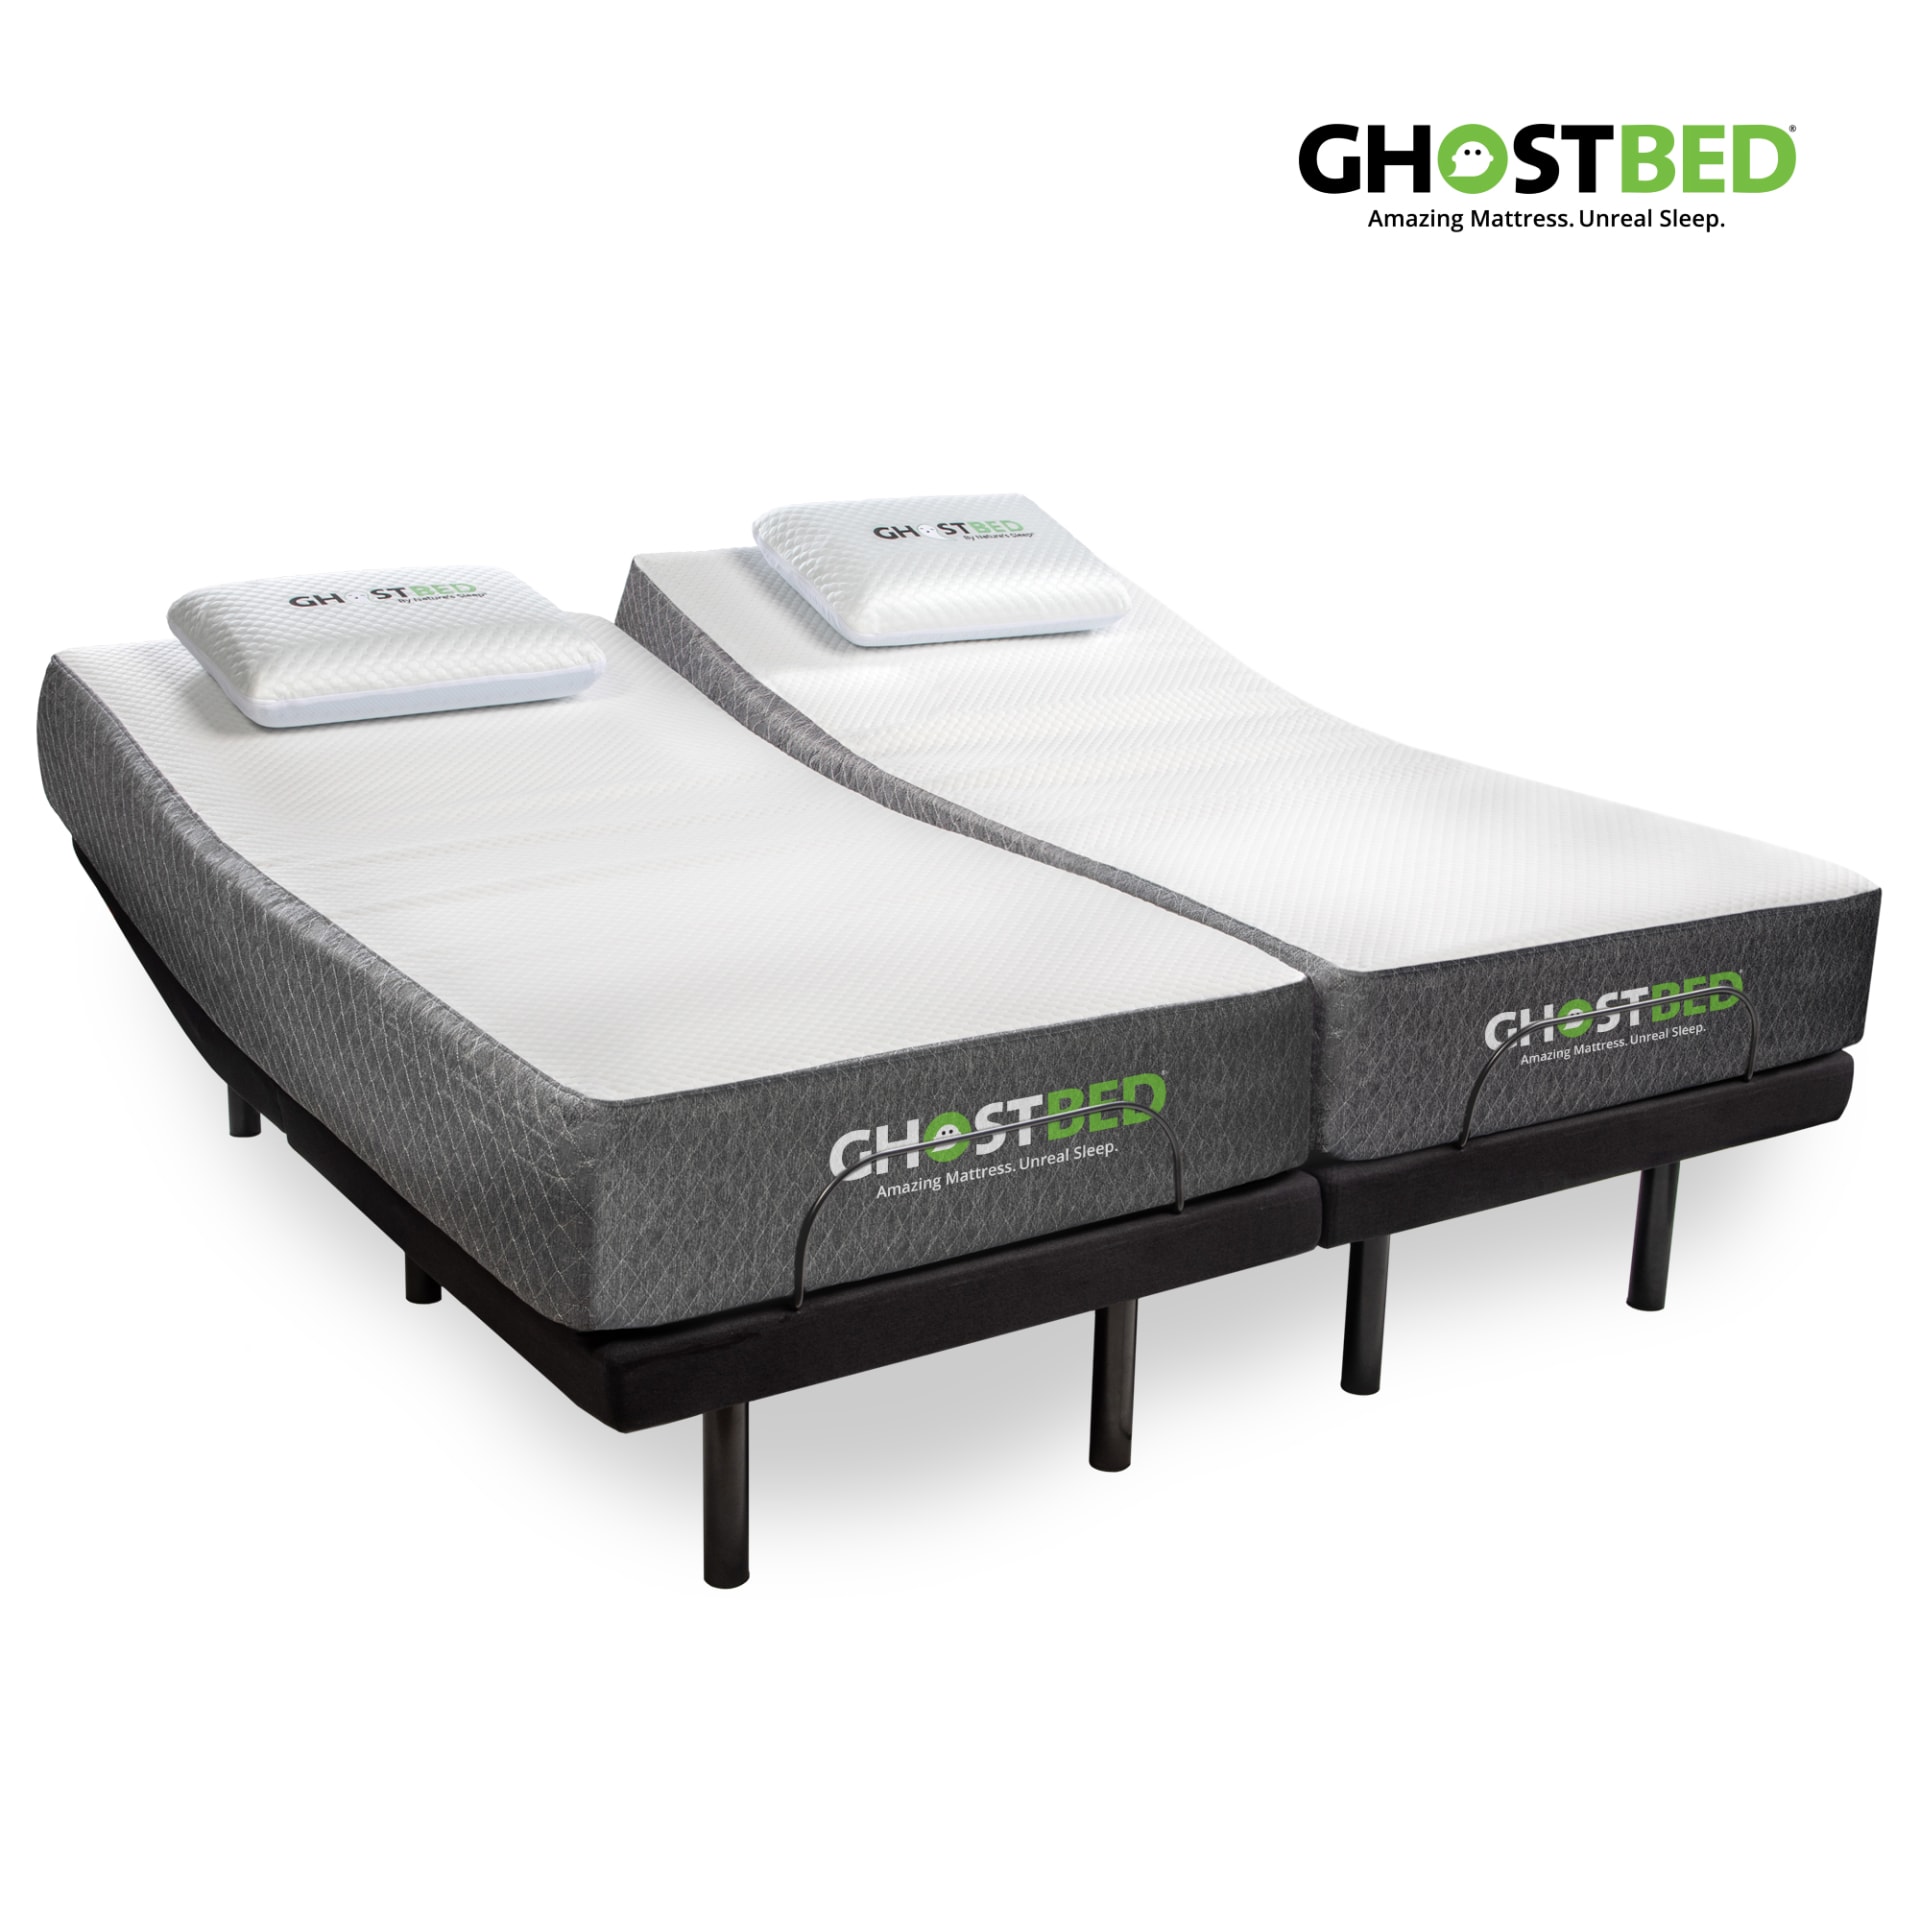 Ghostbed 11 Memory Foam Mattress With, What Is An Adjustable Base Bed Frame Called